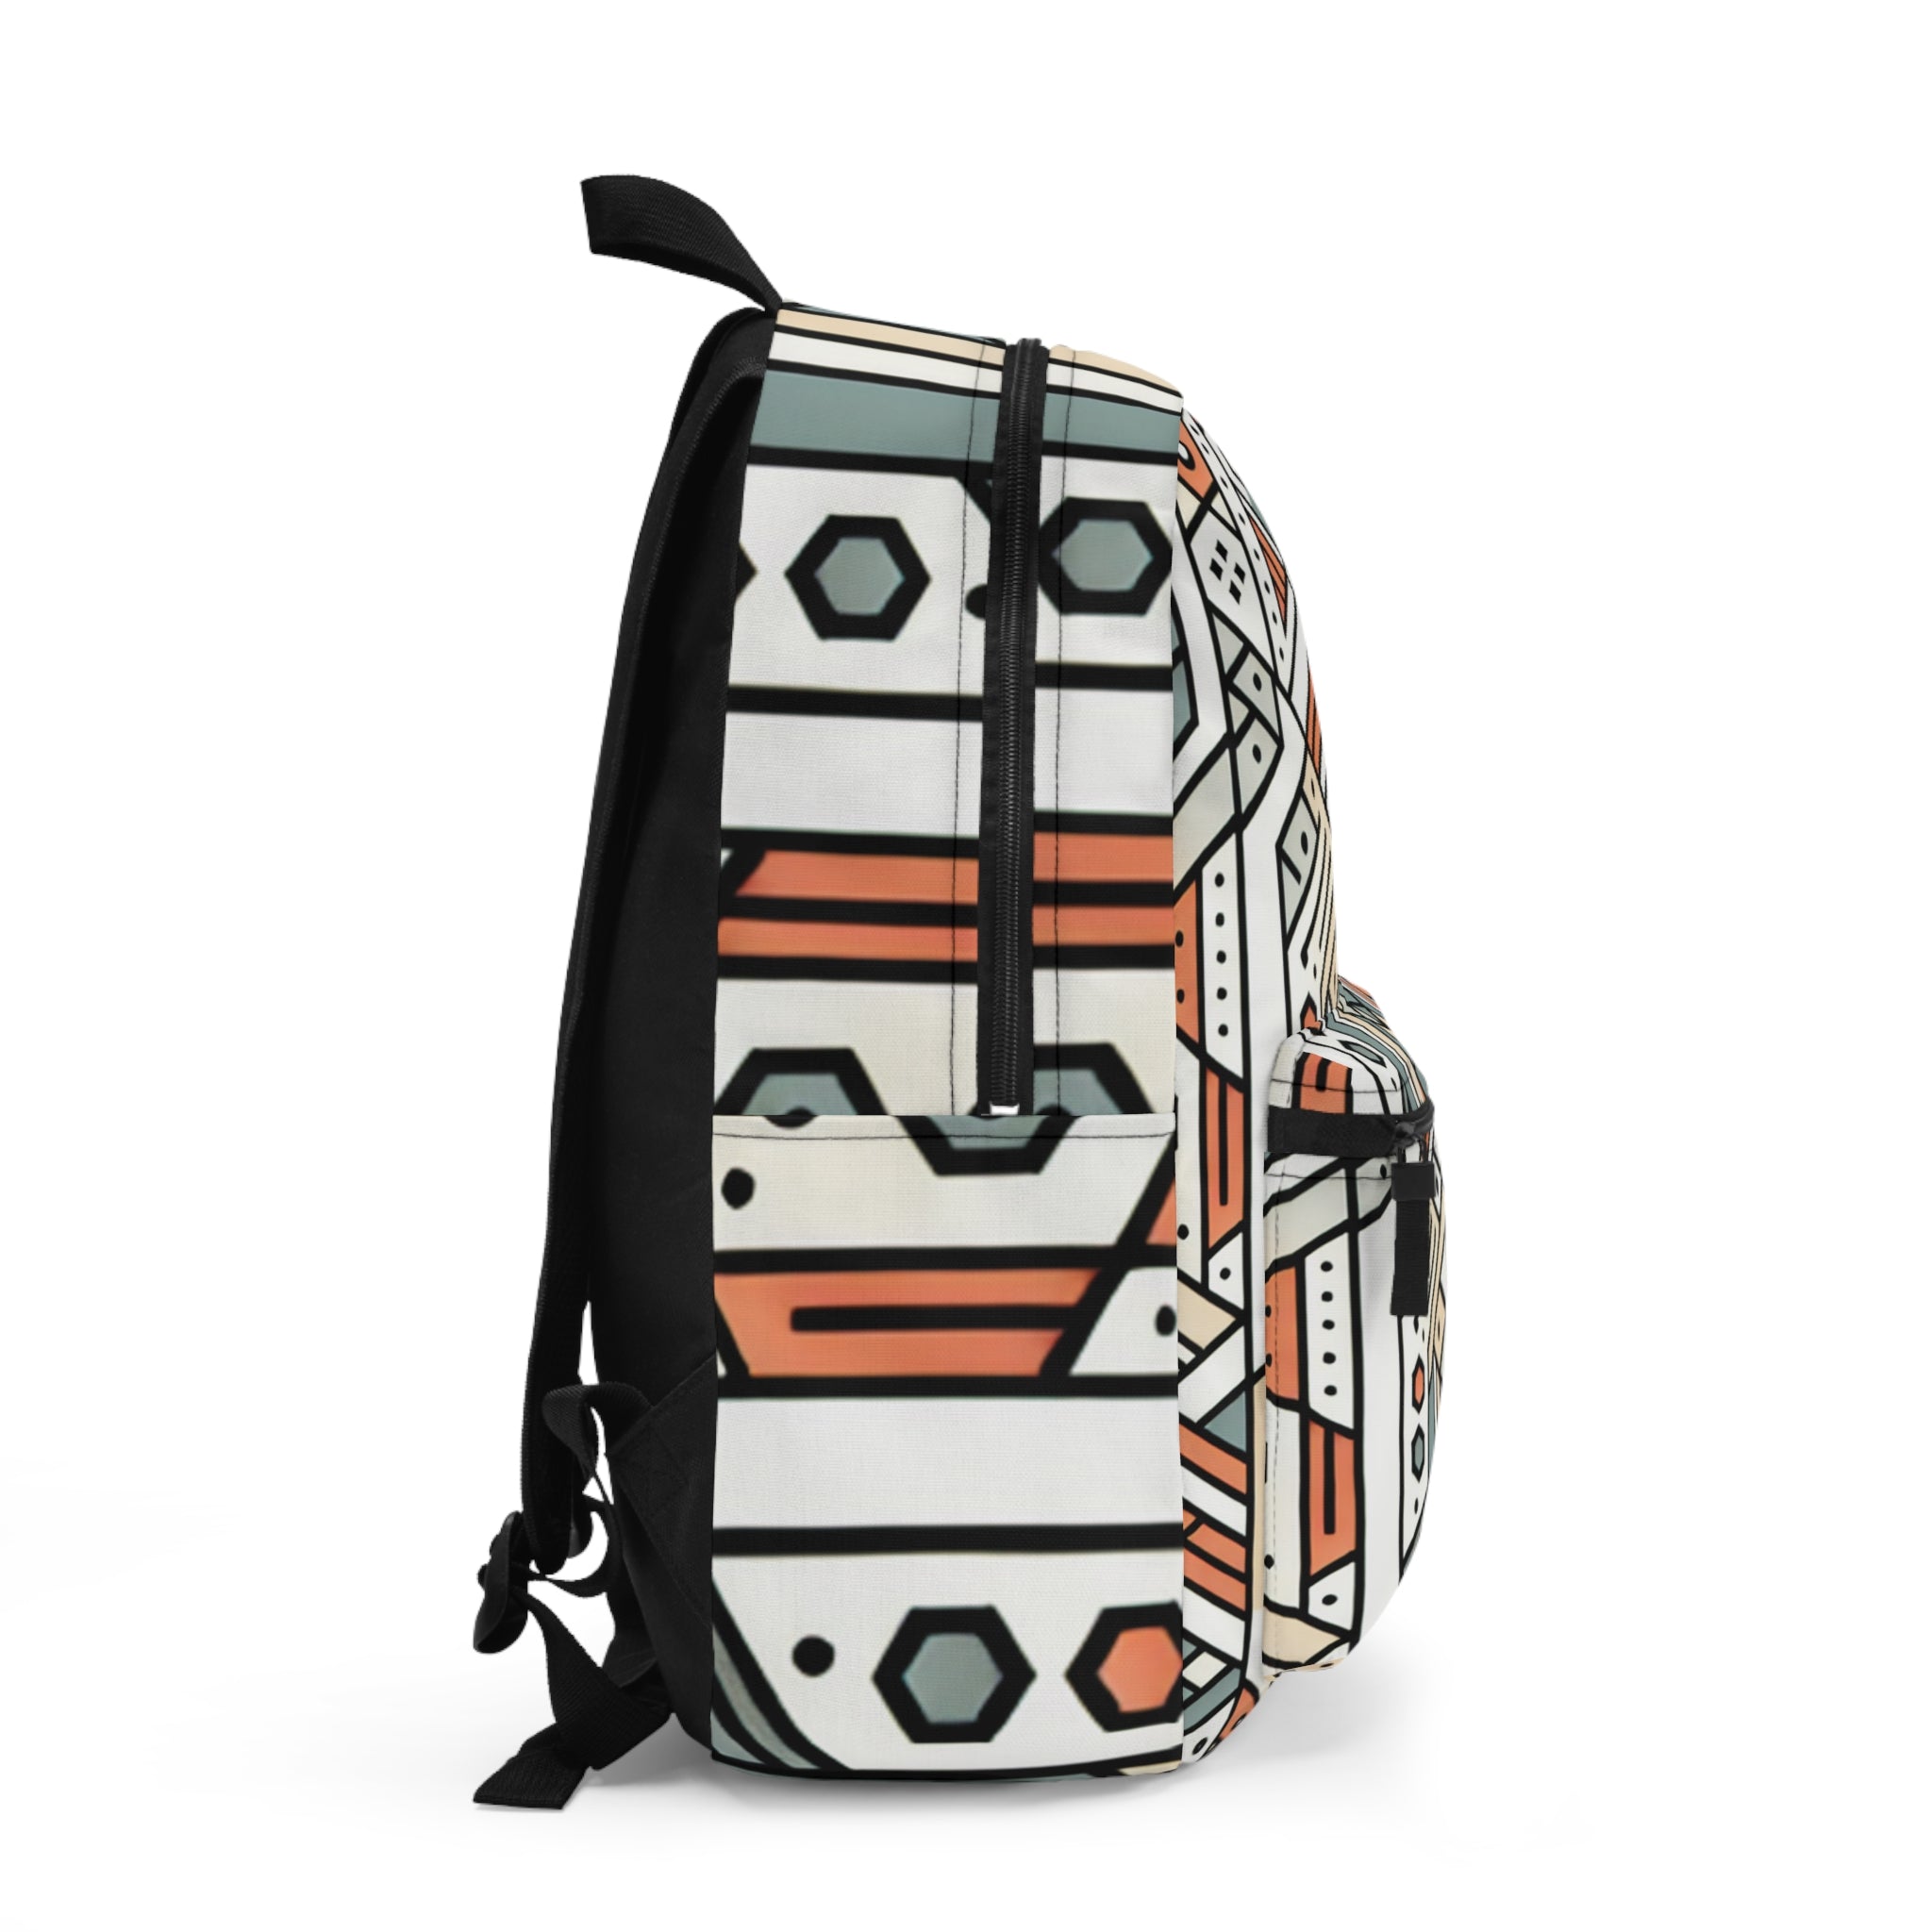 Theodore Backpack for Unisex Travelers - Backpack